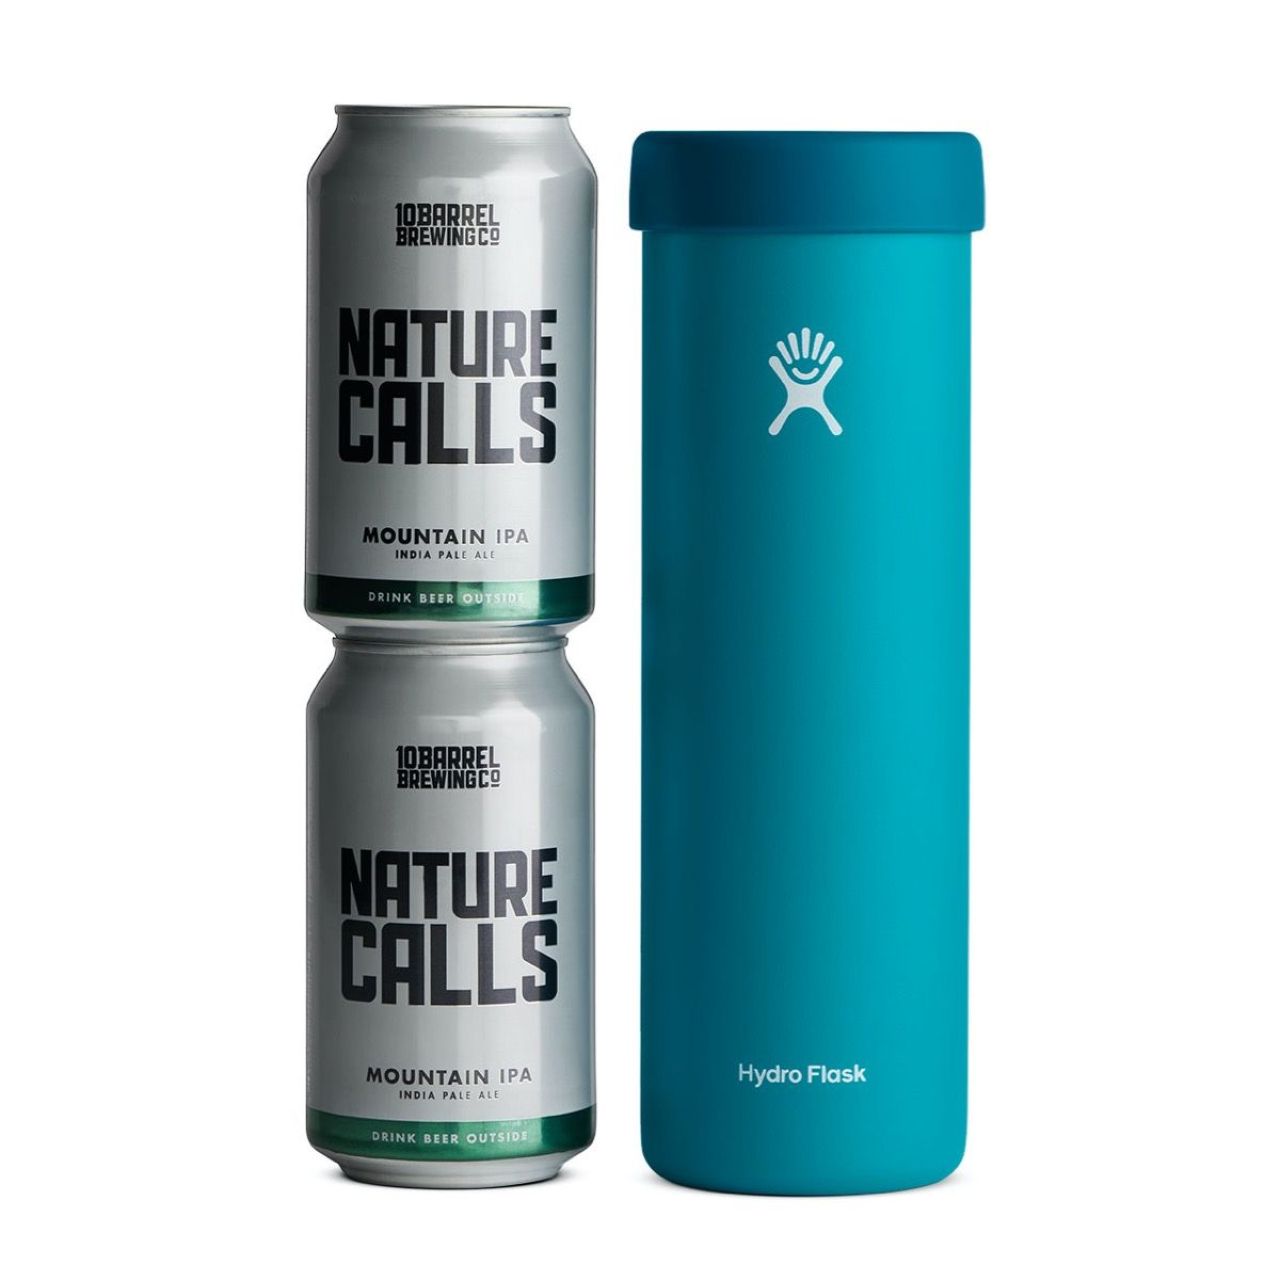 The Hydro Flask Cooler Cup: Best Koozie for Camping? – Renegade